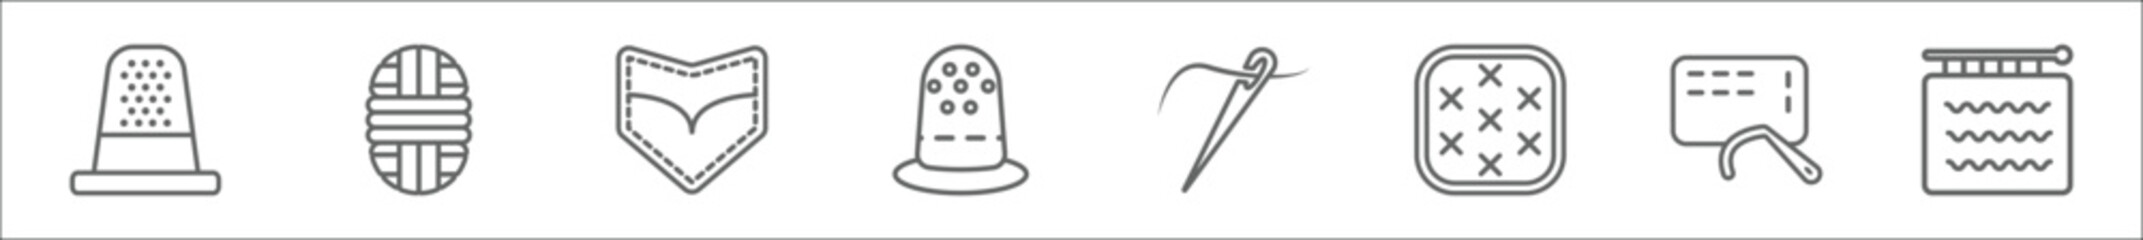 outline set of sew line icons. linear vector icons such as sewing thimble, wool, jeans pocket, thimble, needles, stiching, running stitch, handloom